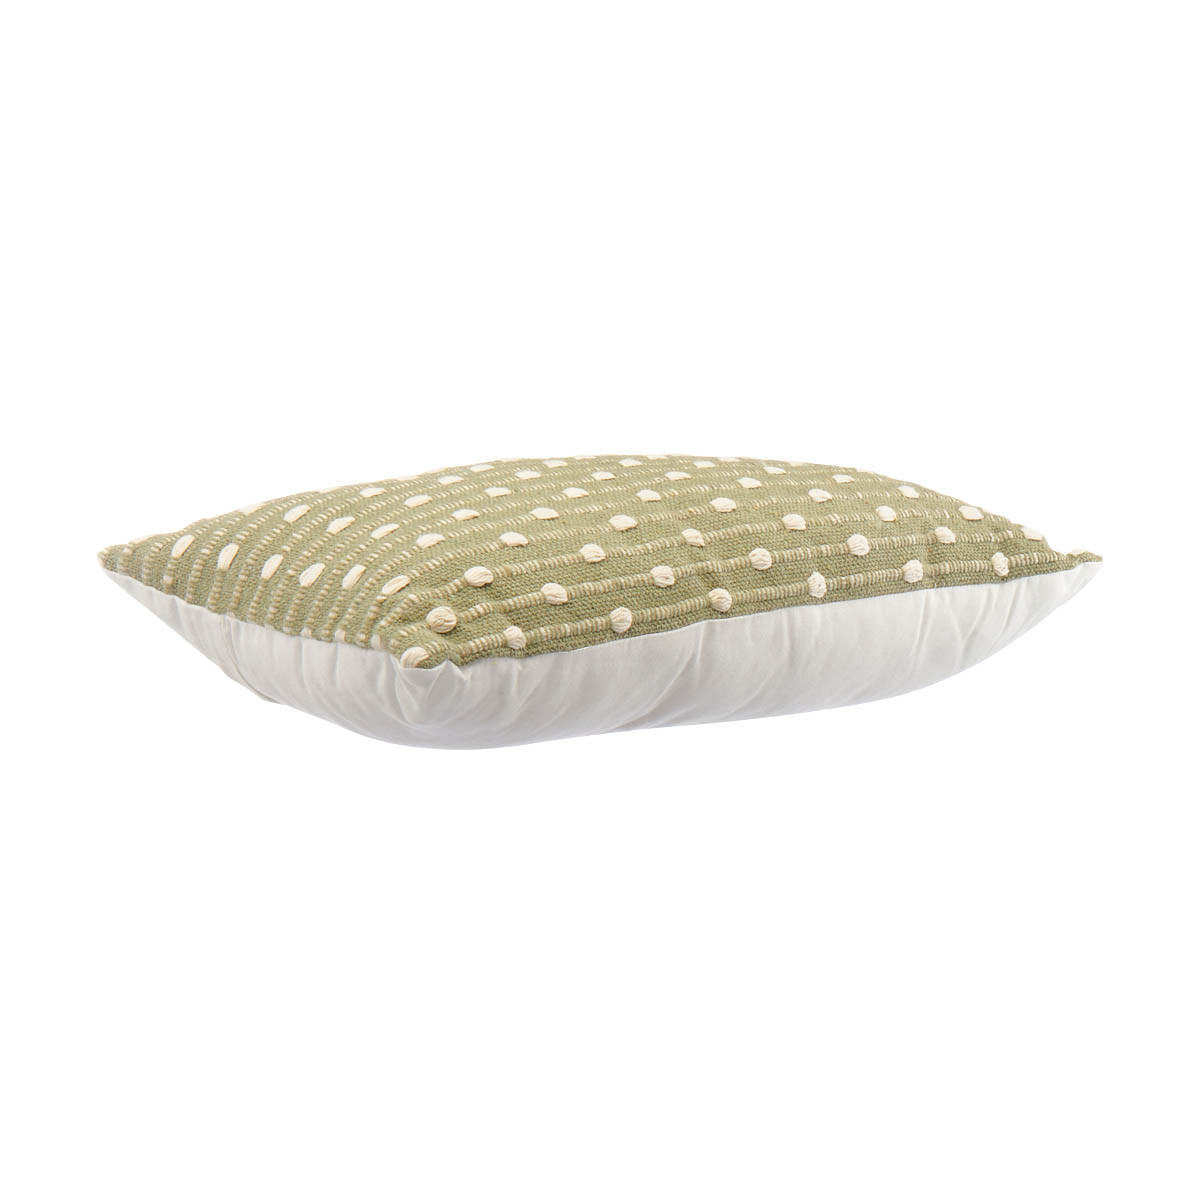 Woven Stripes Rectangular Pillow, 12 in x 20 in